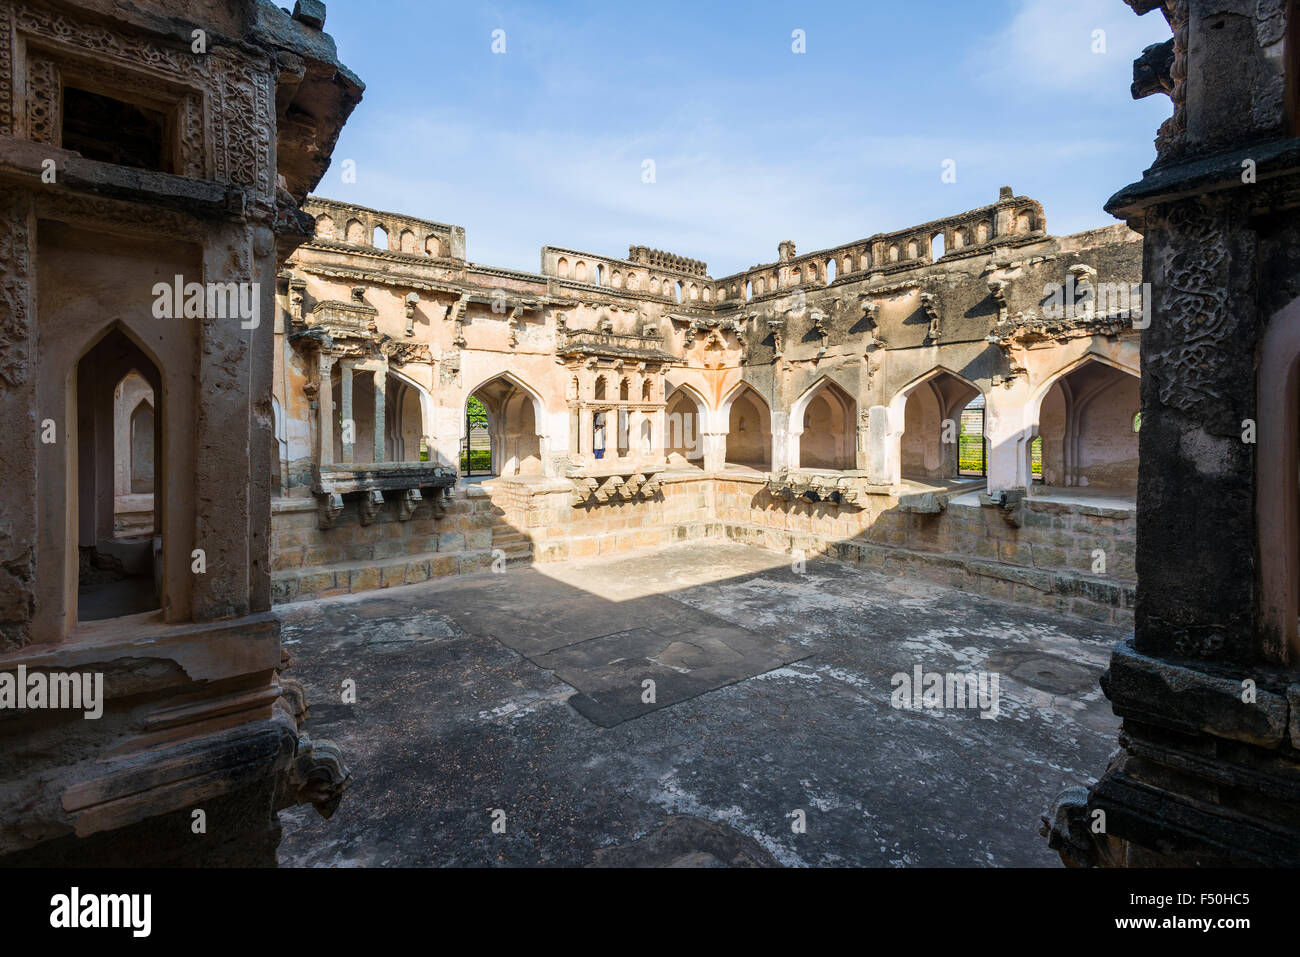 The Queens Bath, a part of the ruins of the former Vijayanagara Empire, which was established in 1336 by Harihara I and his brot Stock Photo